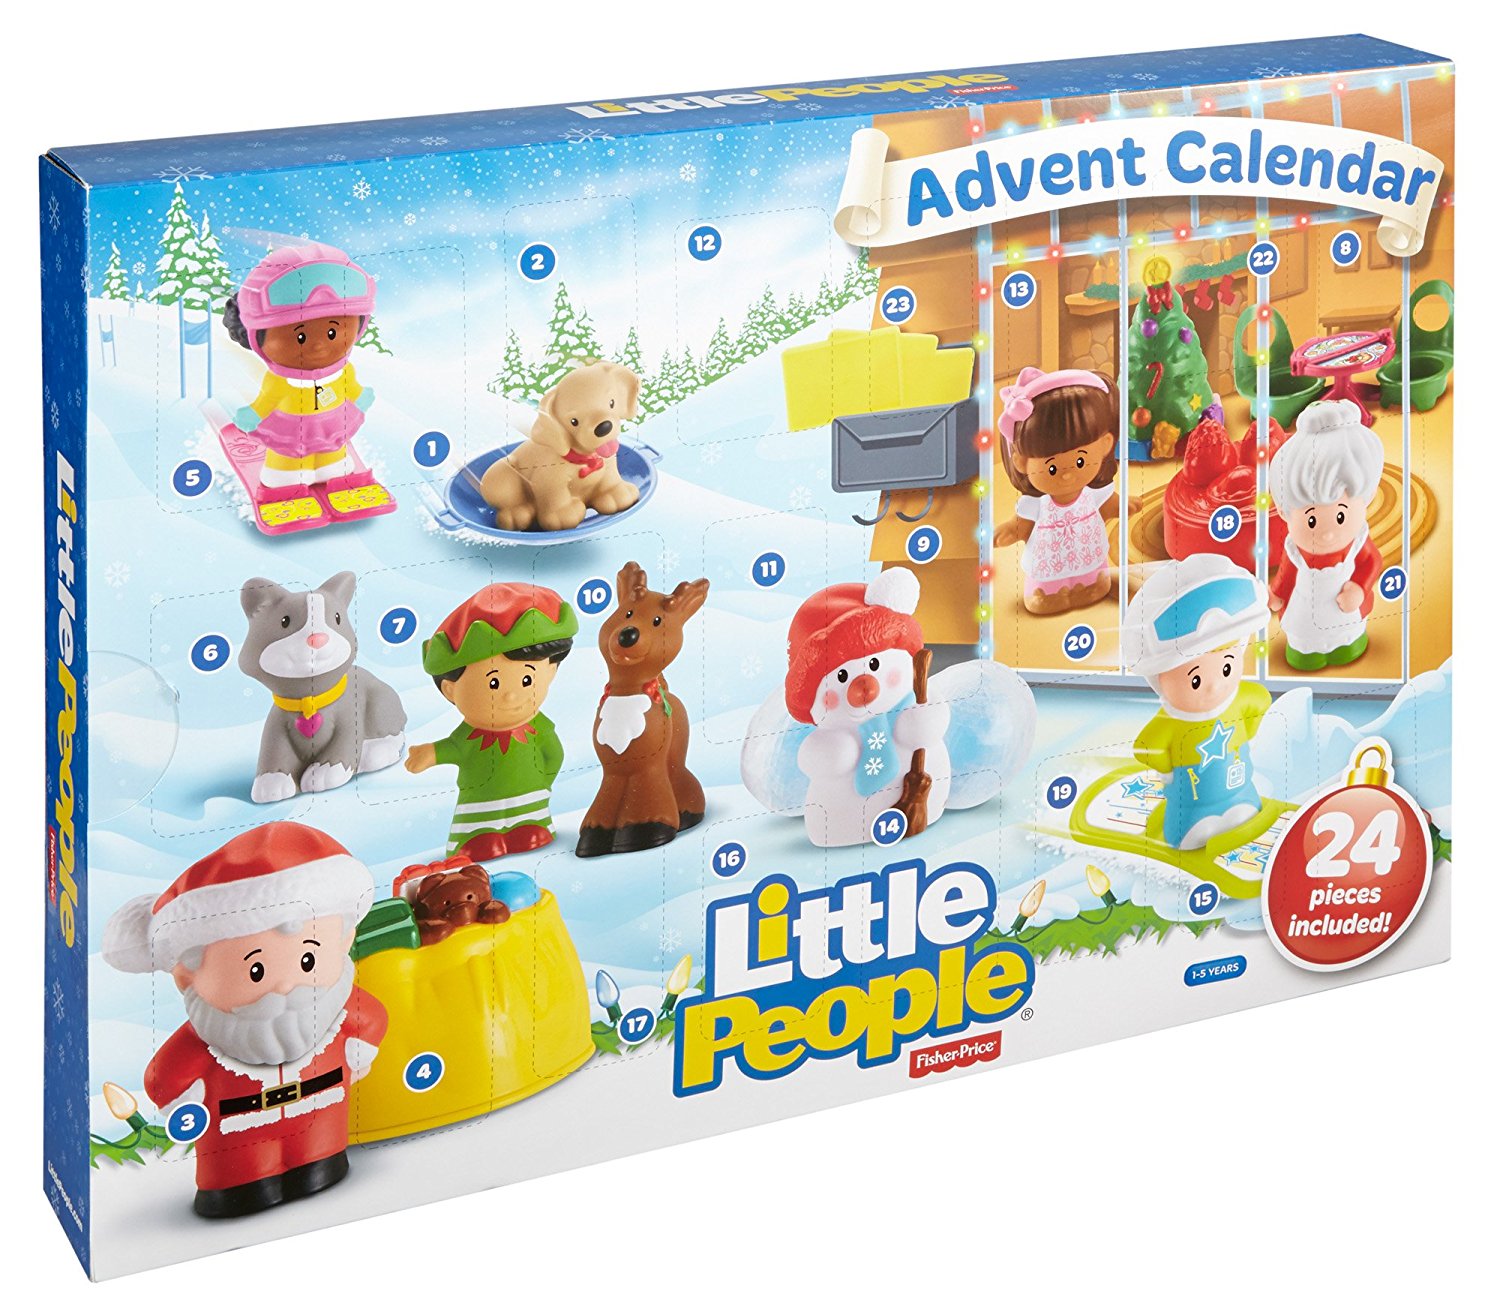 HOT HOT HOT! Fisher-Price Little People Advent Calendar – Just $12.00! Don’t miss it!